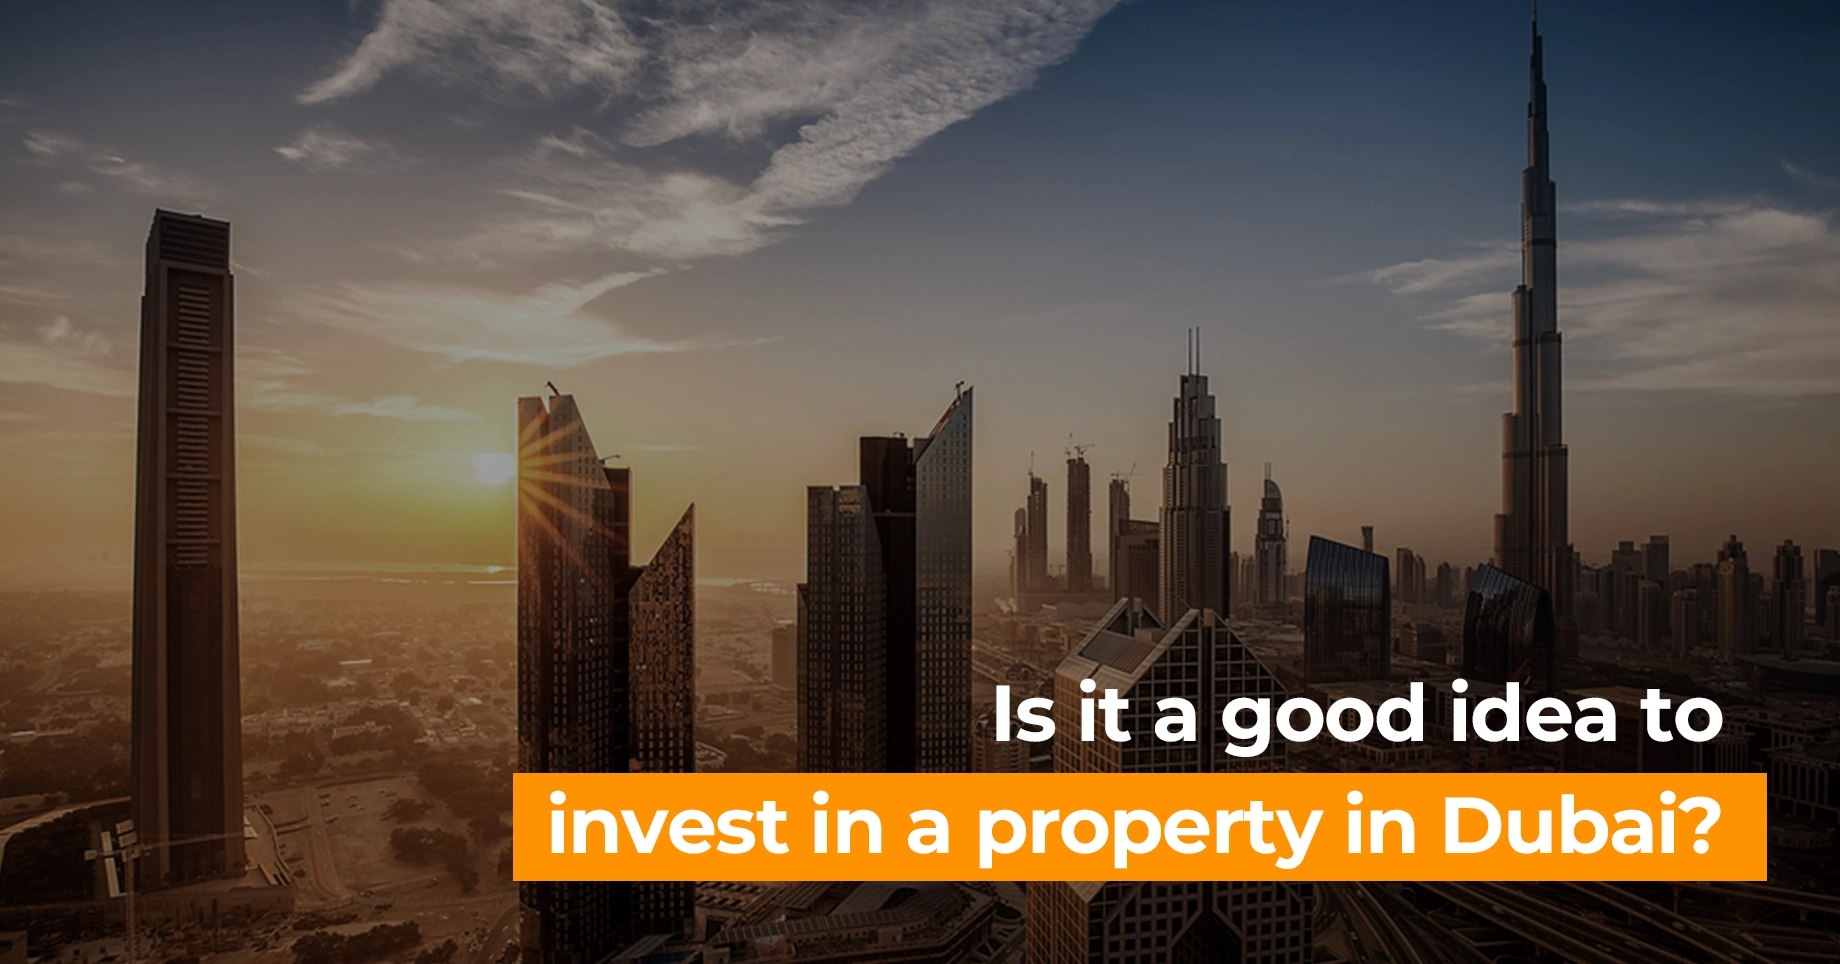 Is it a good idea to invest in a property in Dubai